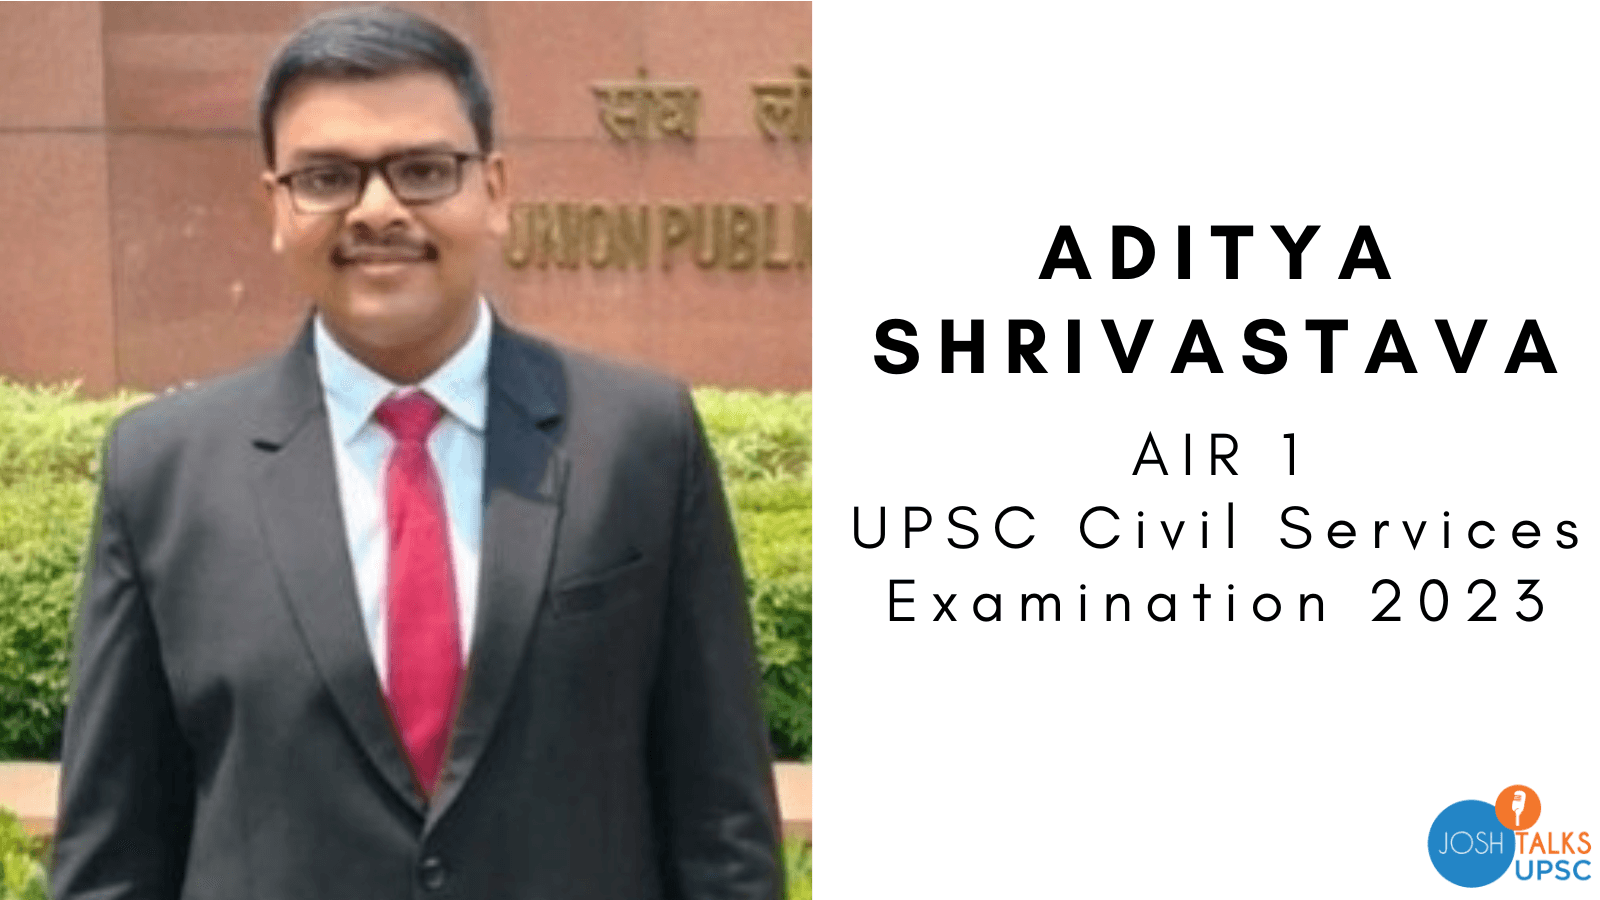 Aditya Shrivastava, from Lucknow, secures the first rank in UPSC Civil Services Exam 2023